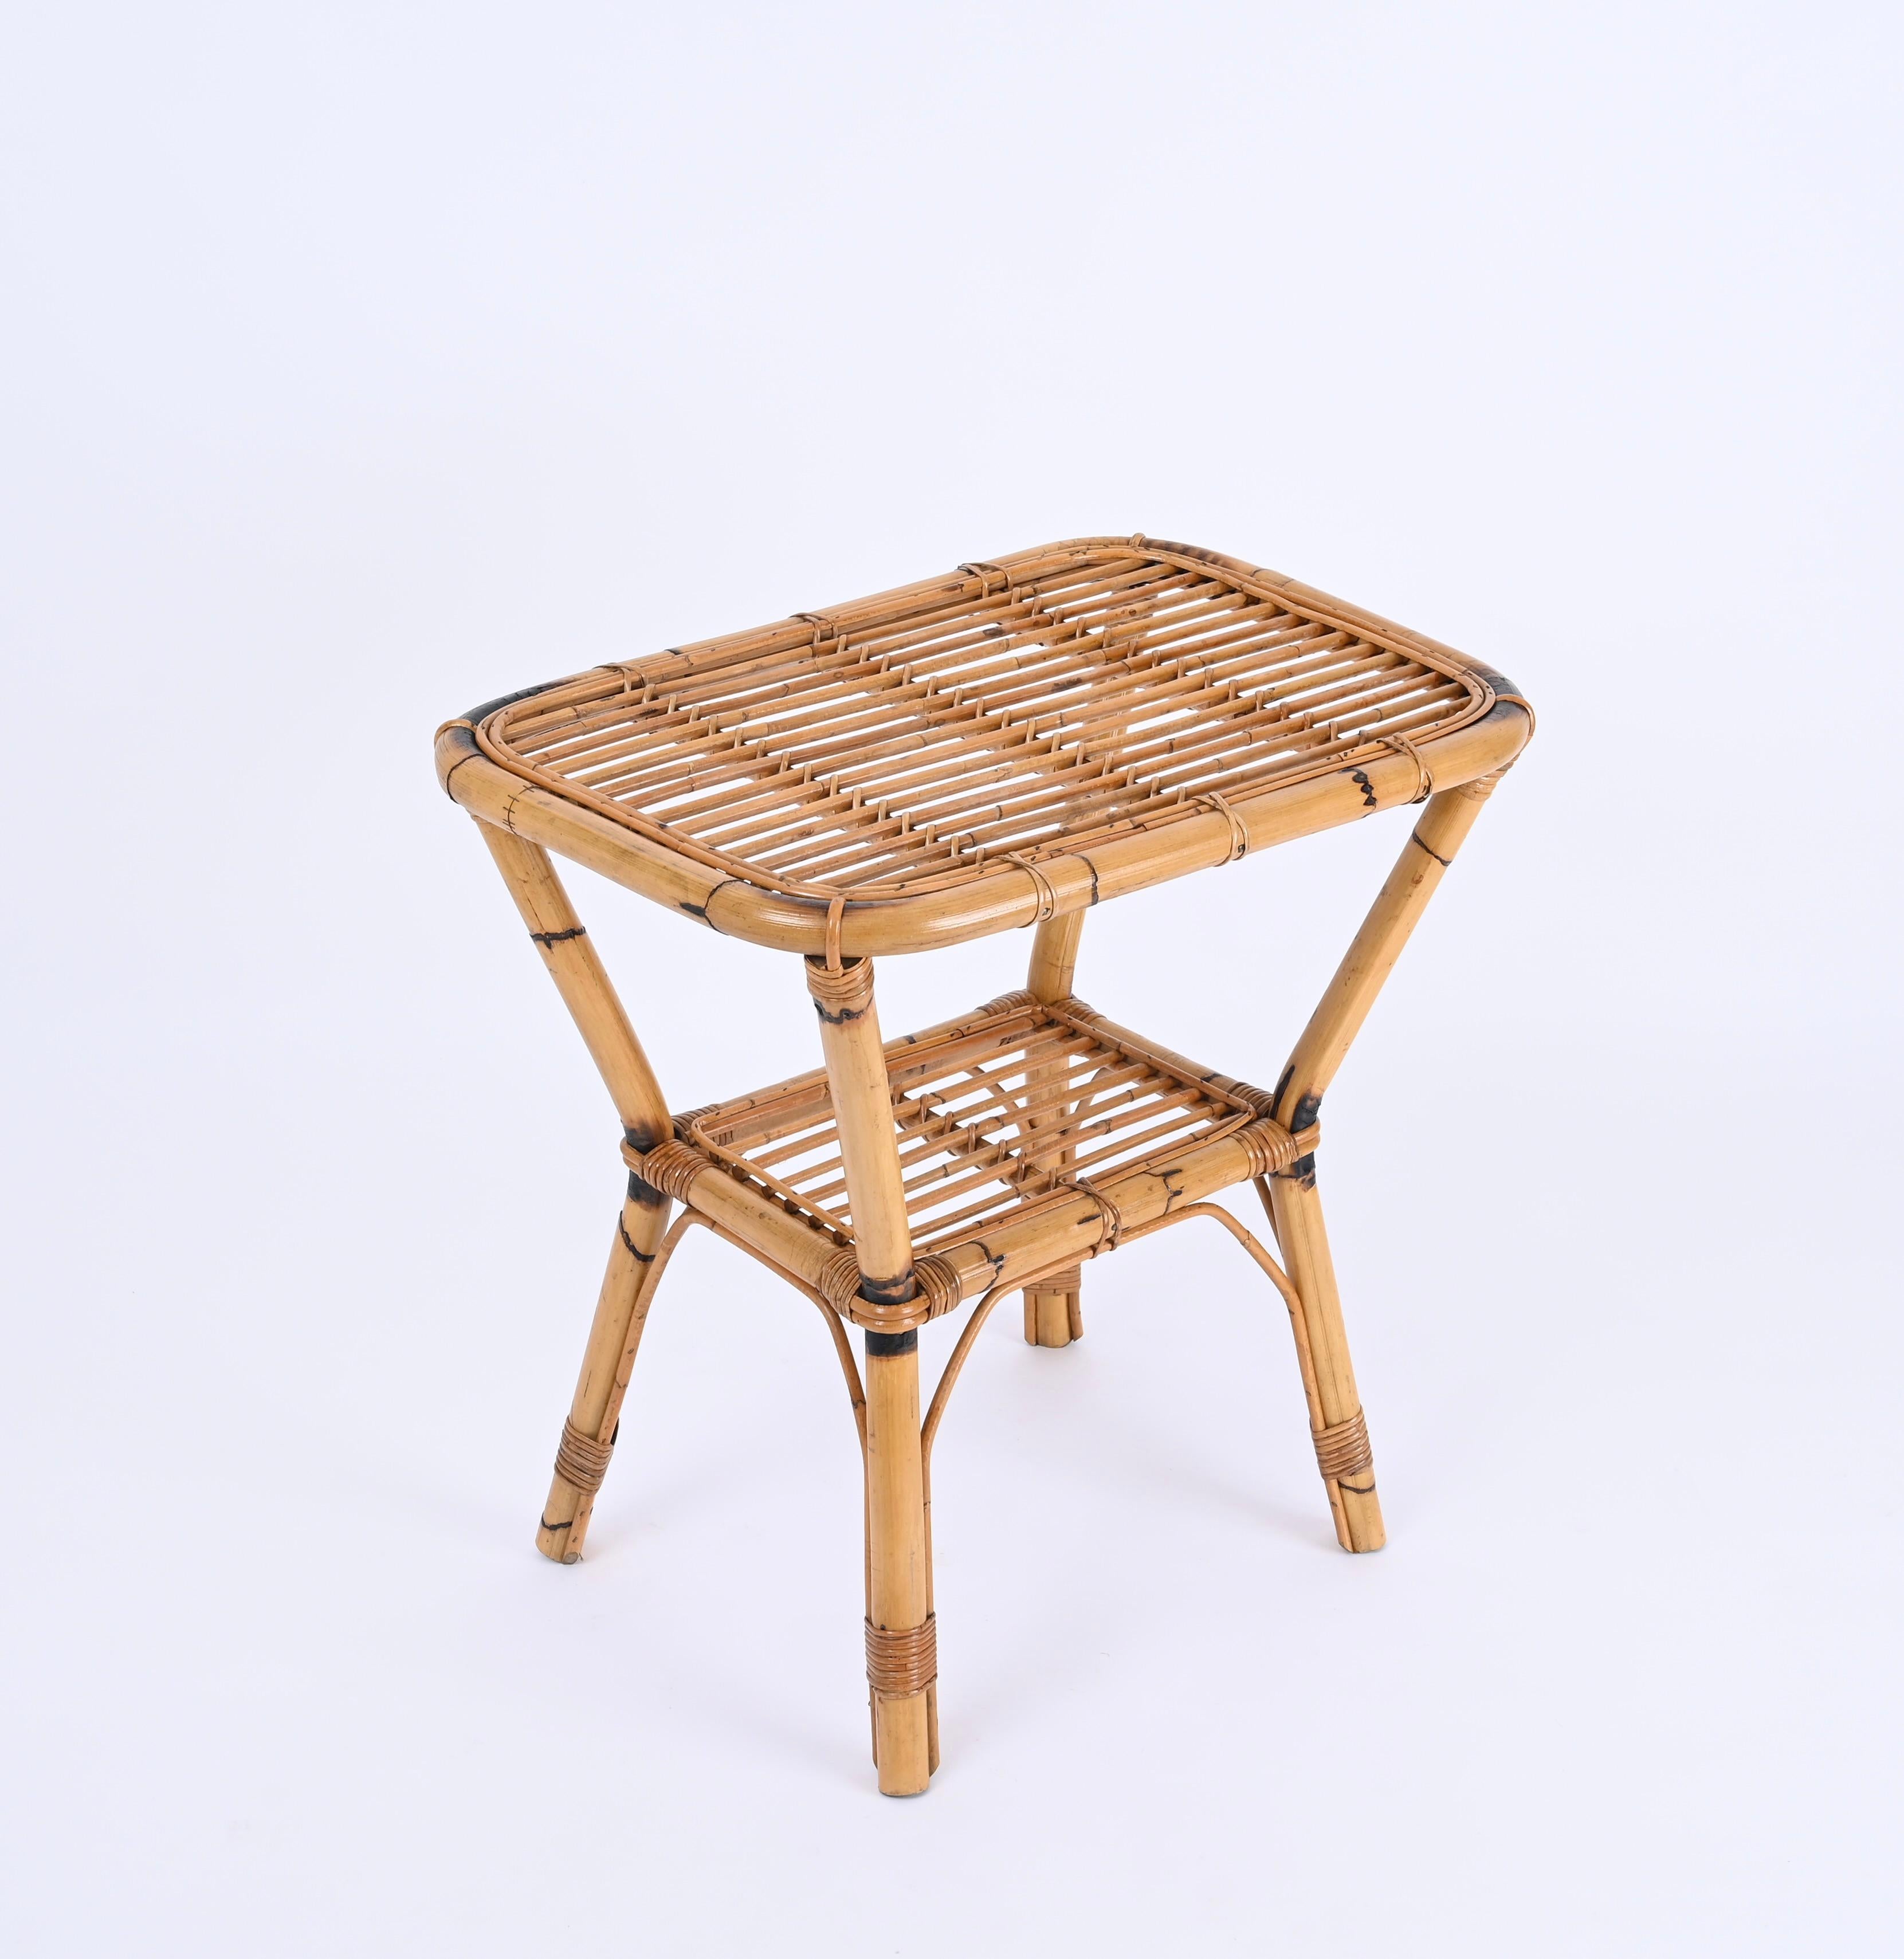 French Riviera Side or Coffee Table in Rattan, Bamboo and Wicker, Italy 1960s For Sale 5